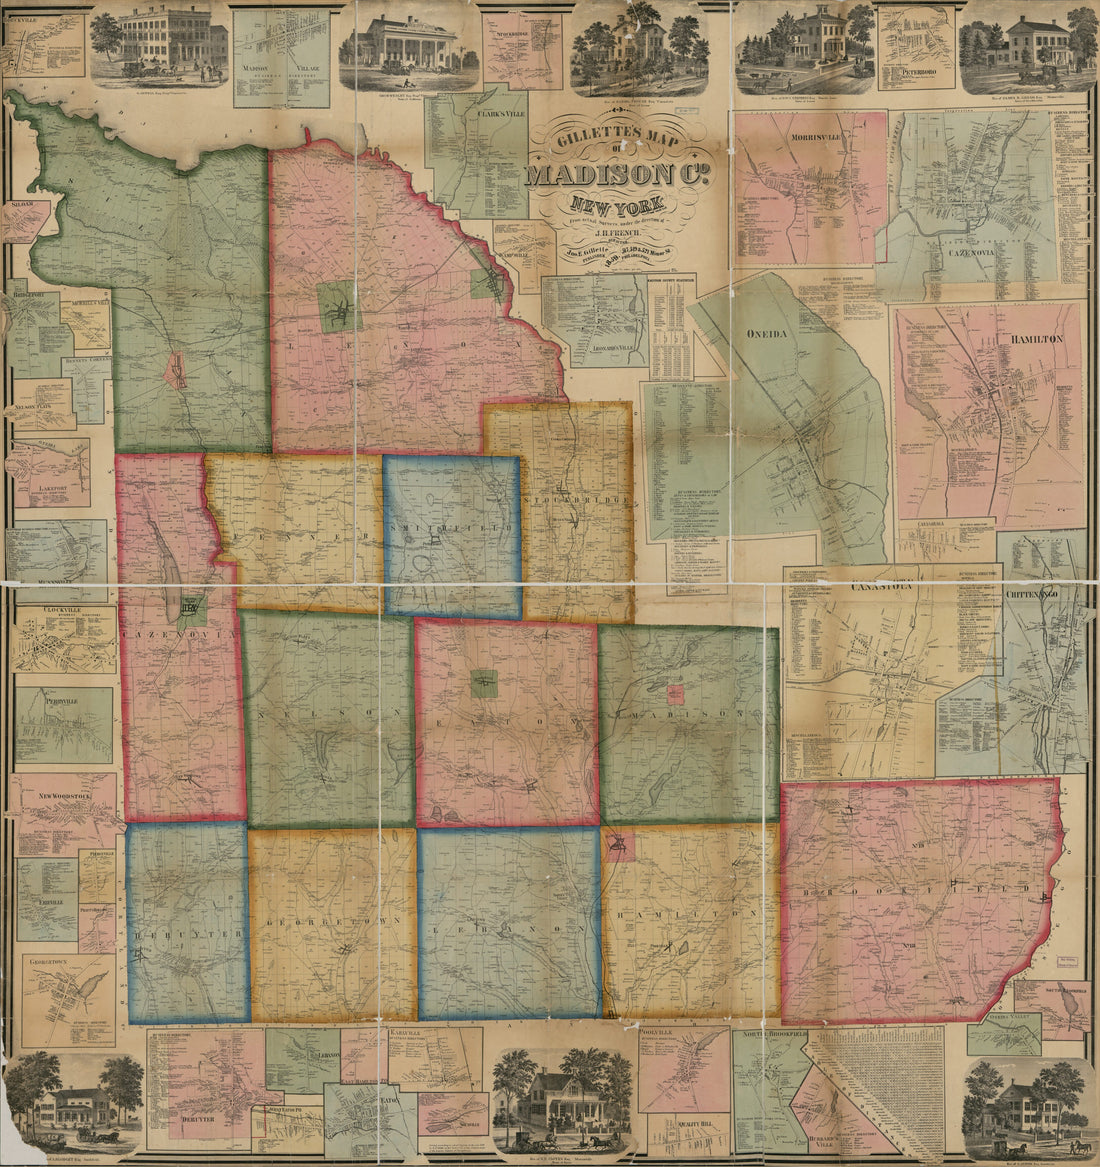 This old map of Gillette&